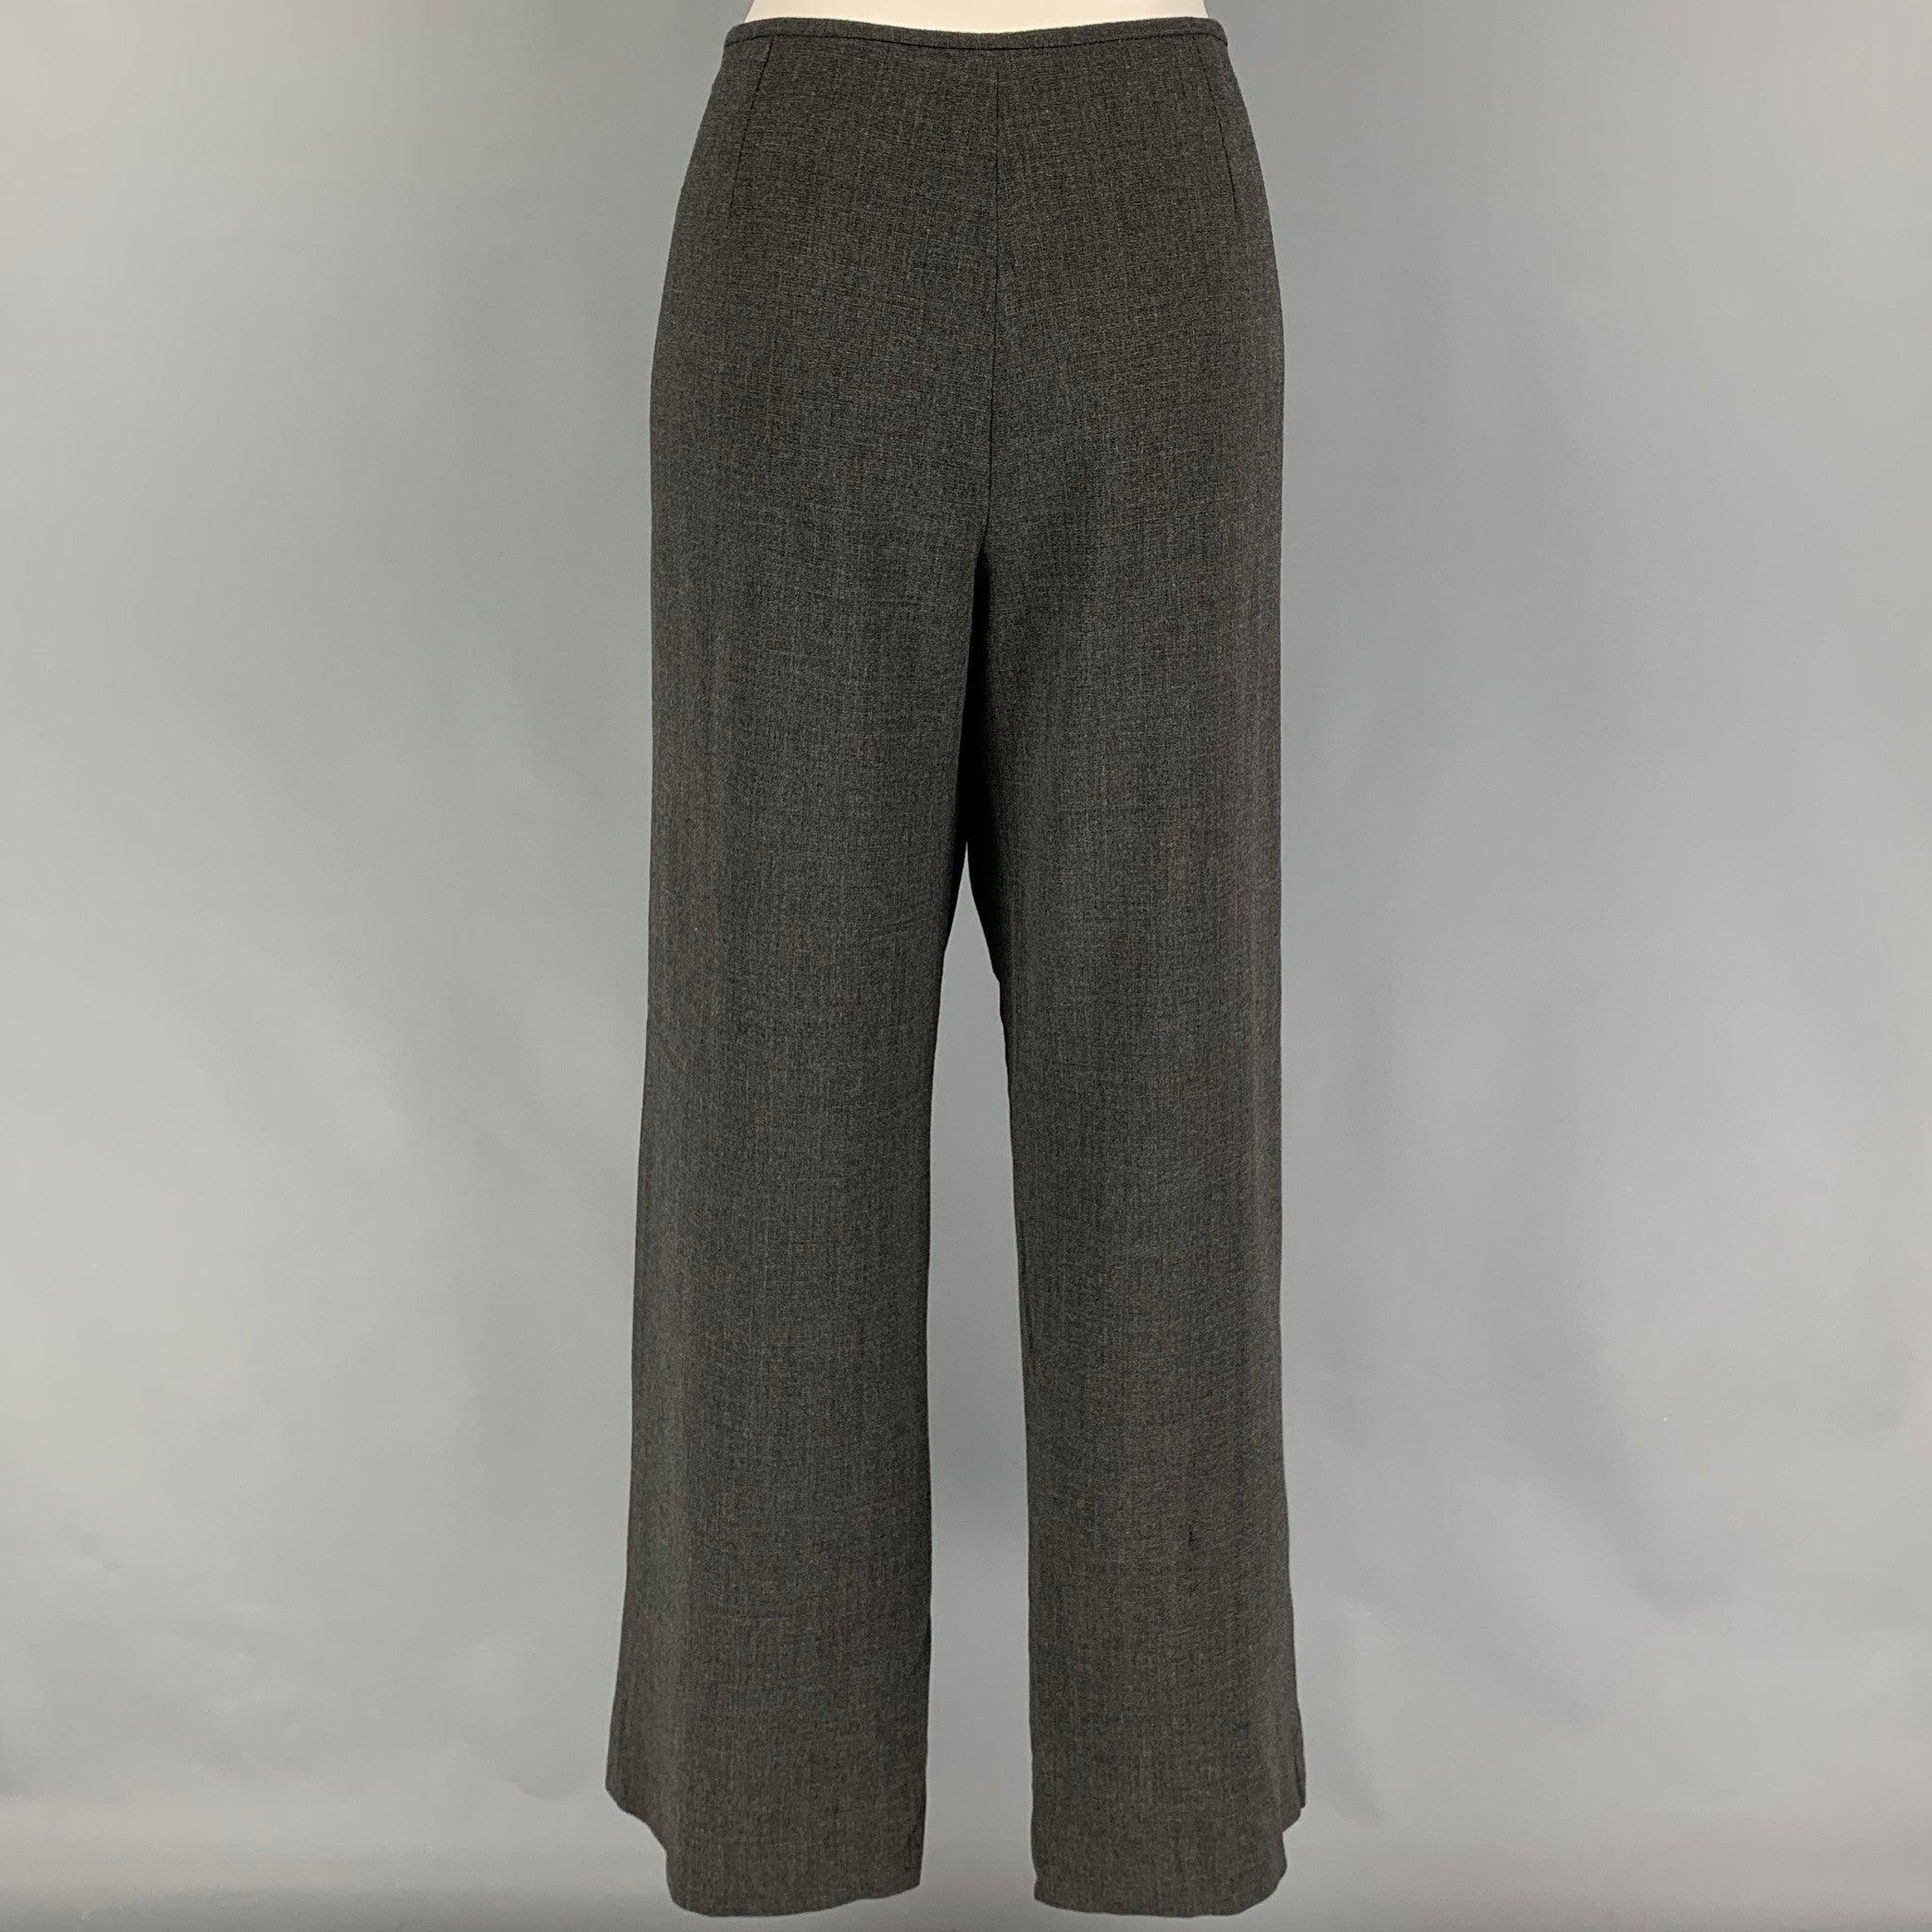 ARMANI COLLEZIONI pants comes in a grey wool / polyamide featuring a low rise and a side zipper closure. Made in Italy.
Very Good
Pre-Owned Condition. 

Marked:  12 

Measurements: 
 Waist: 34 inches Rise: 10.5 inches Inseam: 31 inches 
 
 
